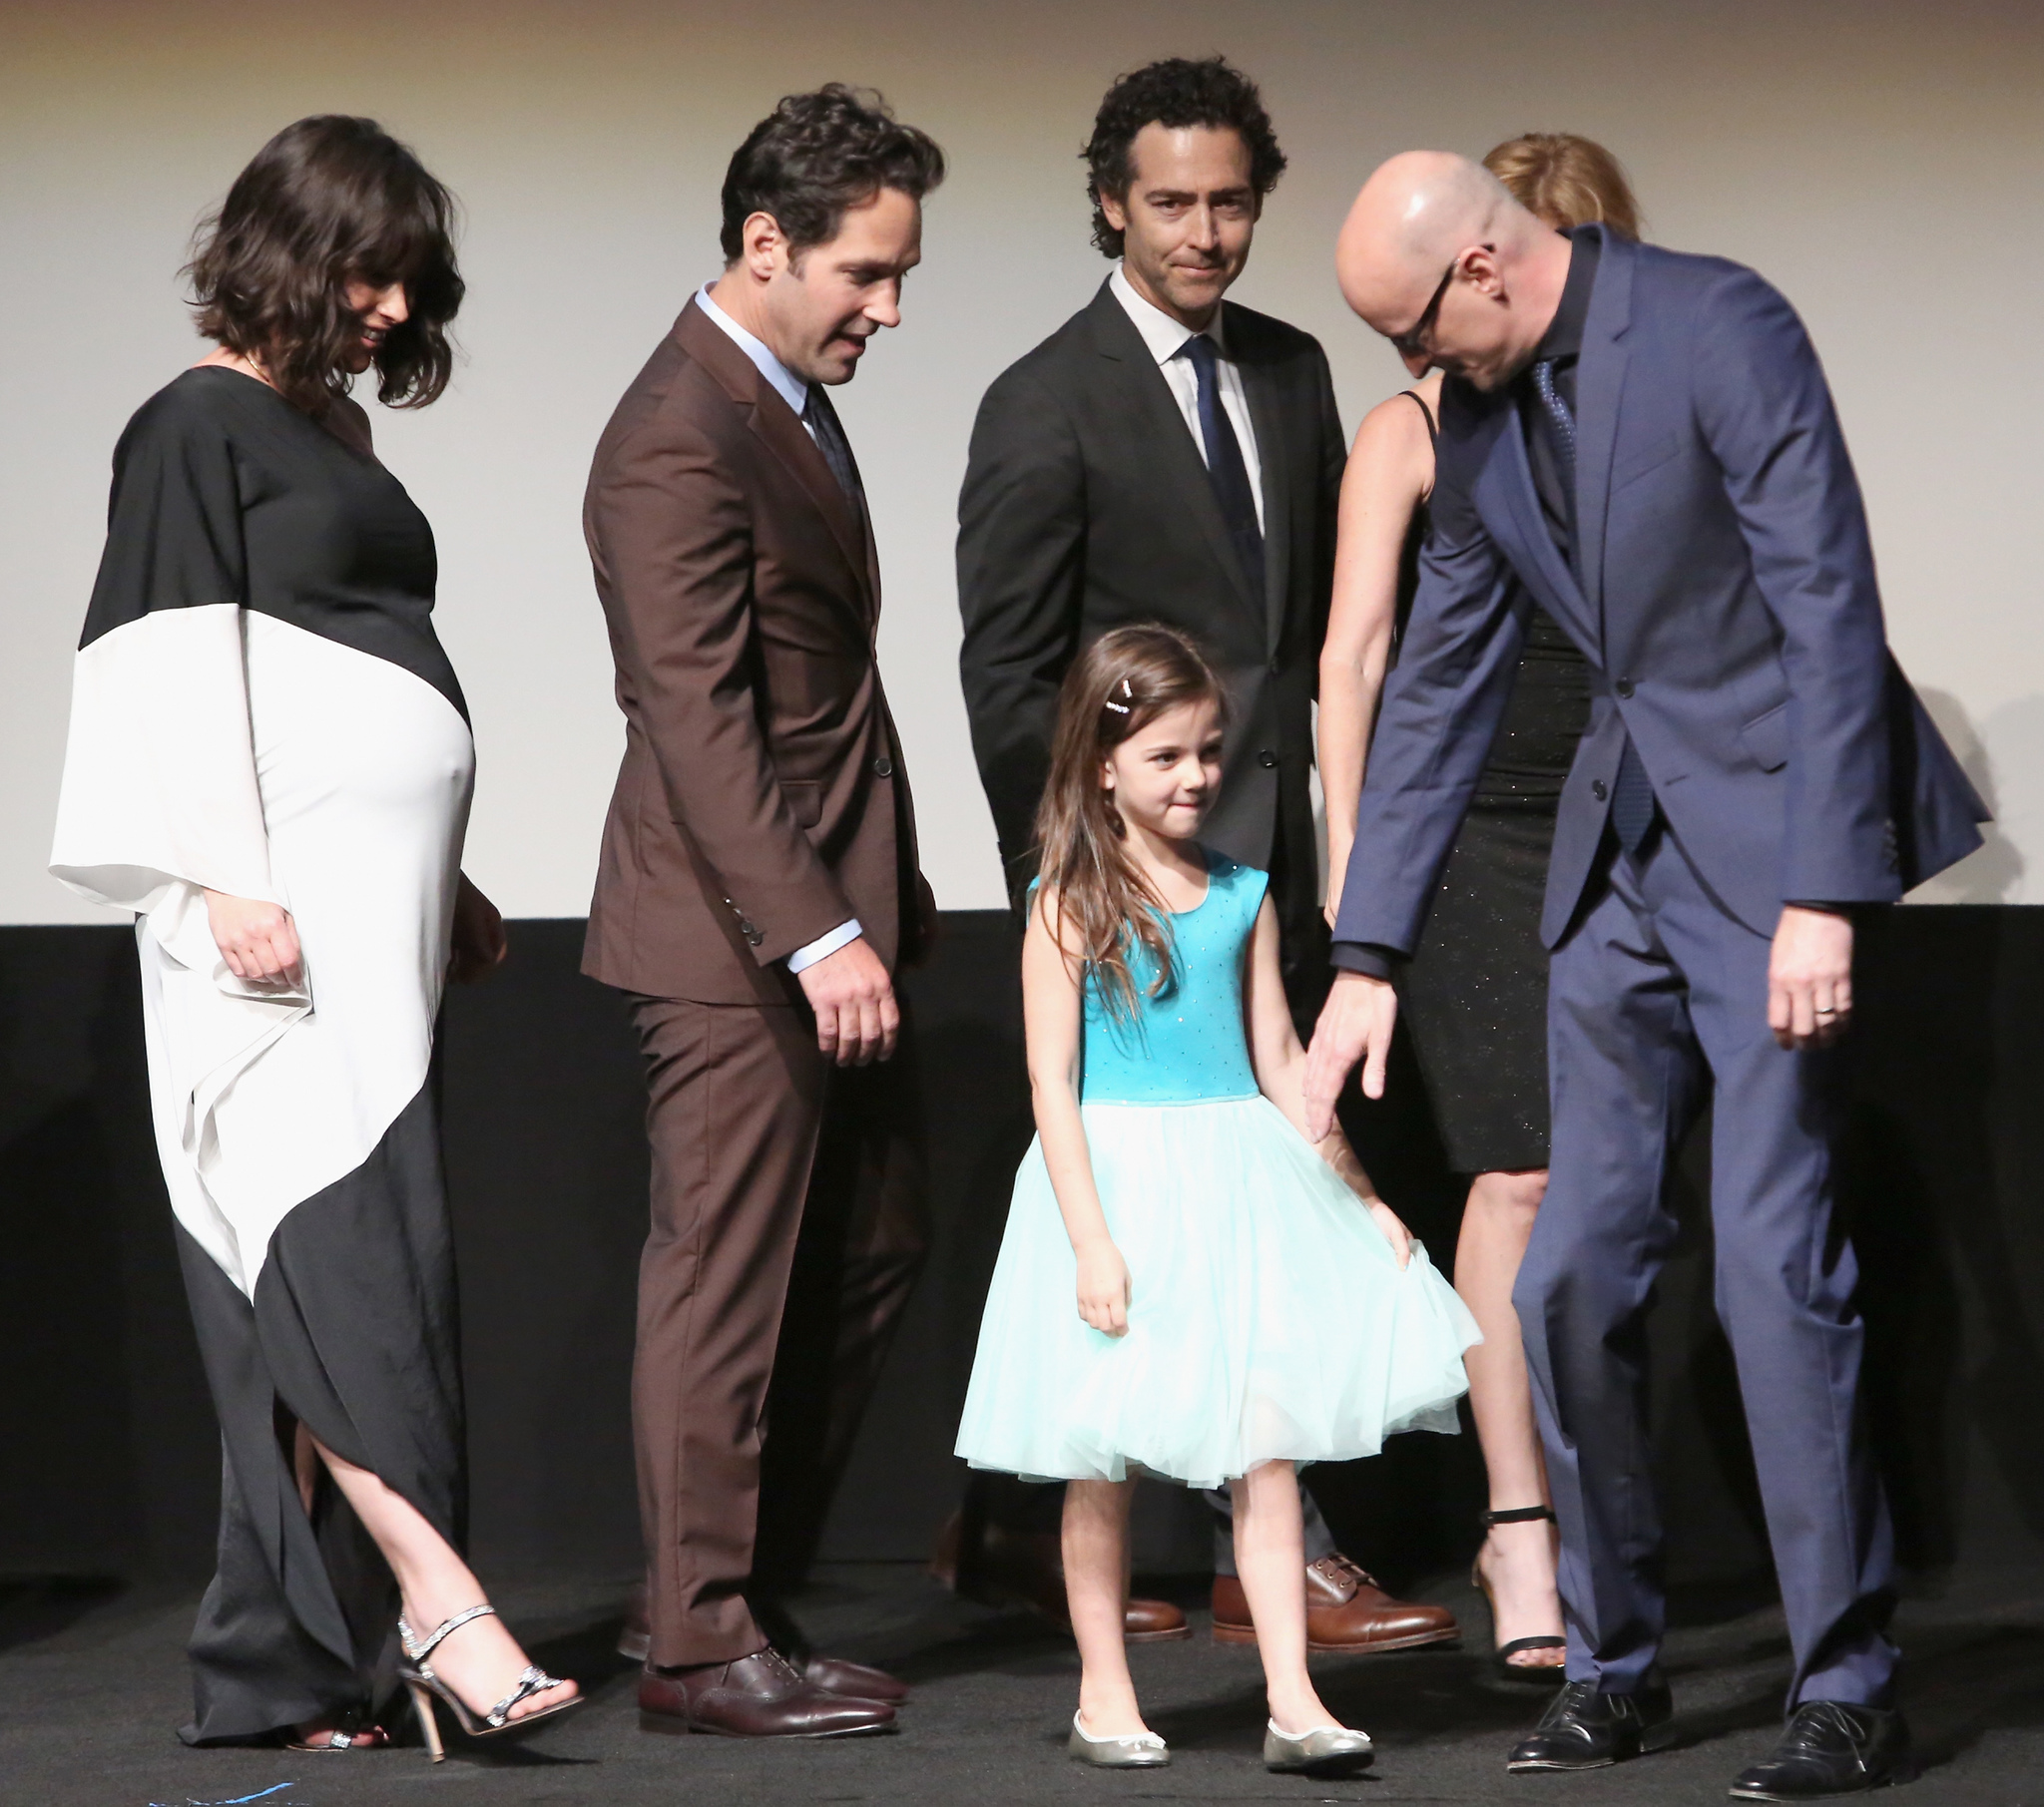 Peyton Reed, Paul Rudd, John Fortson, Evangeline Lilly and Abby Ryder Fortson